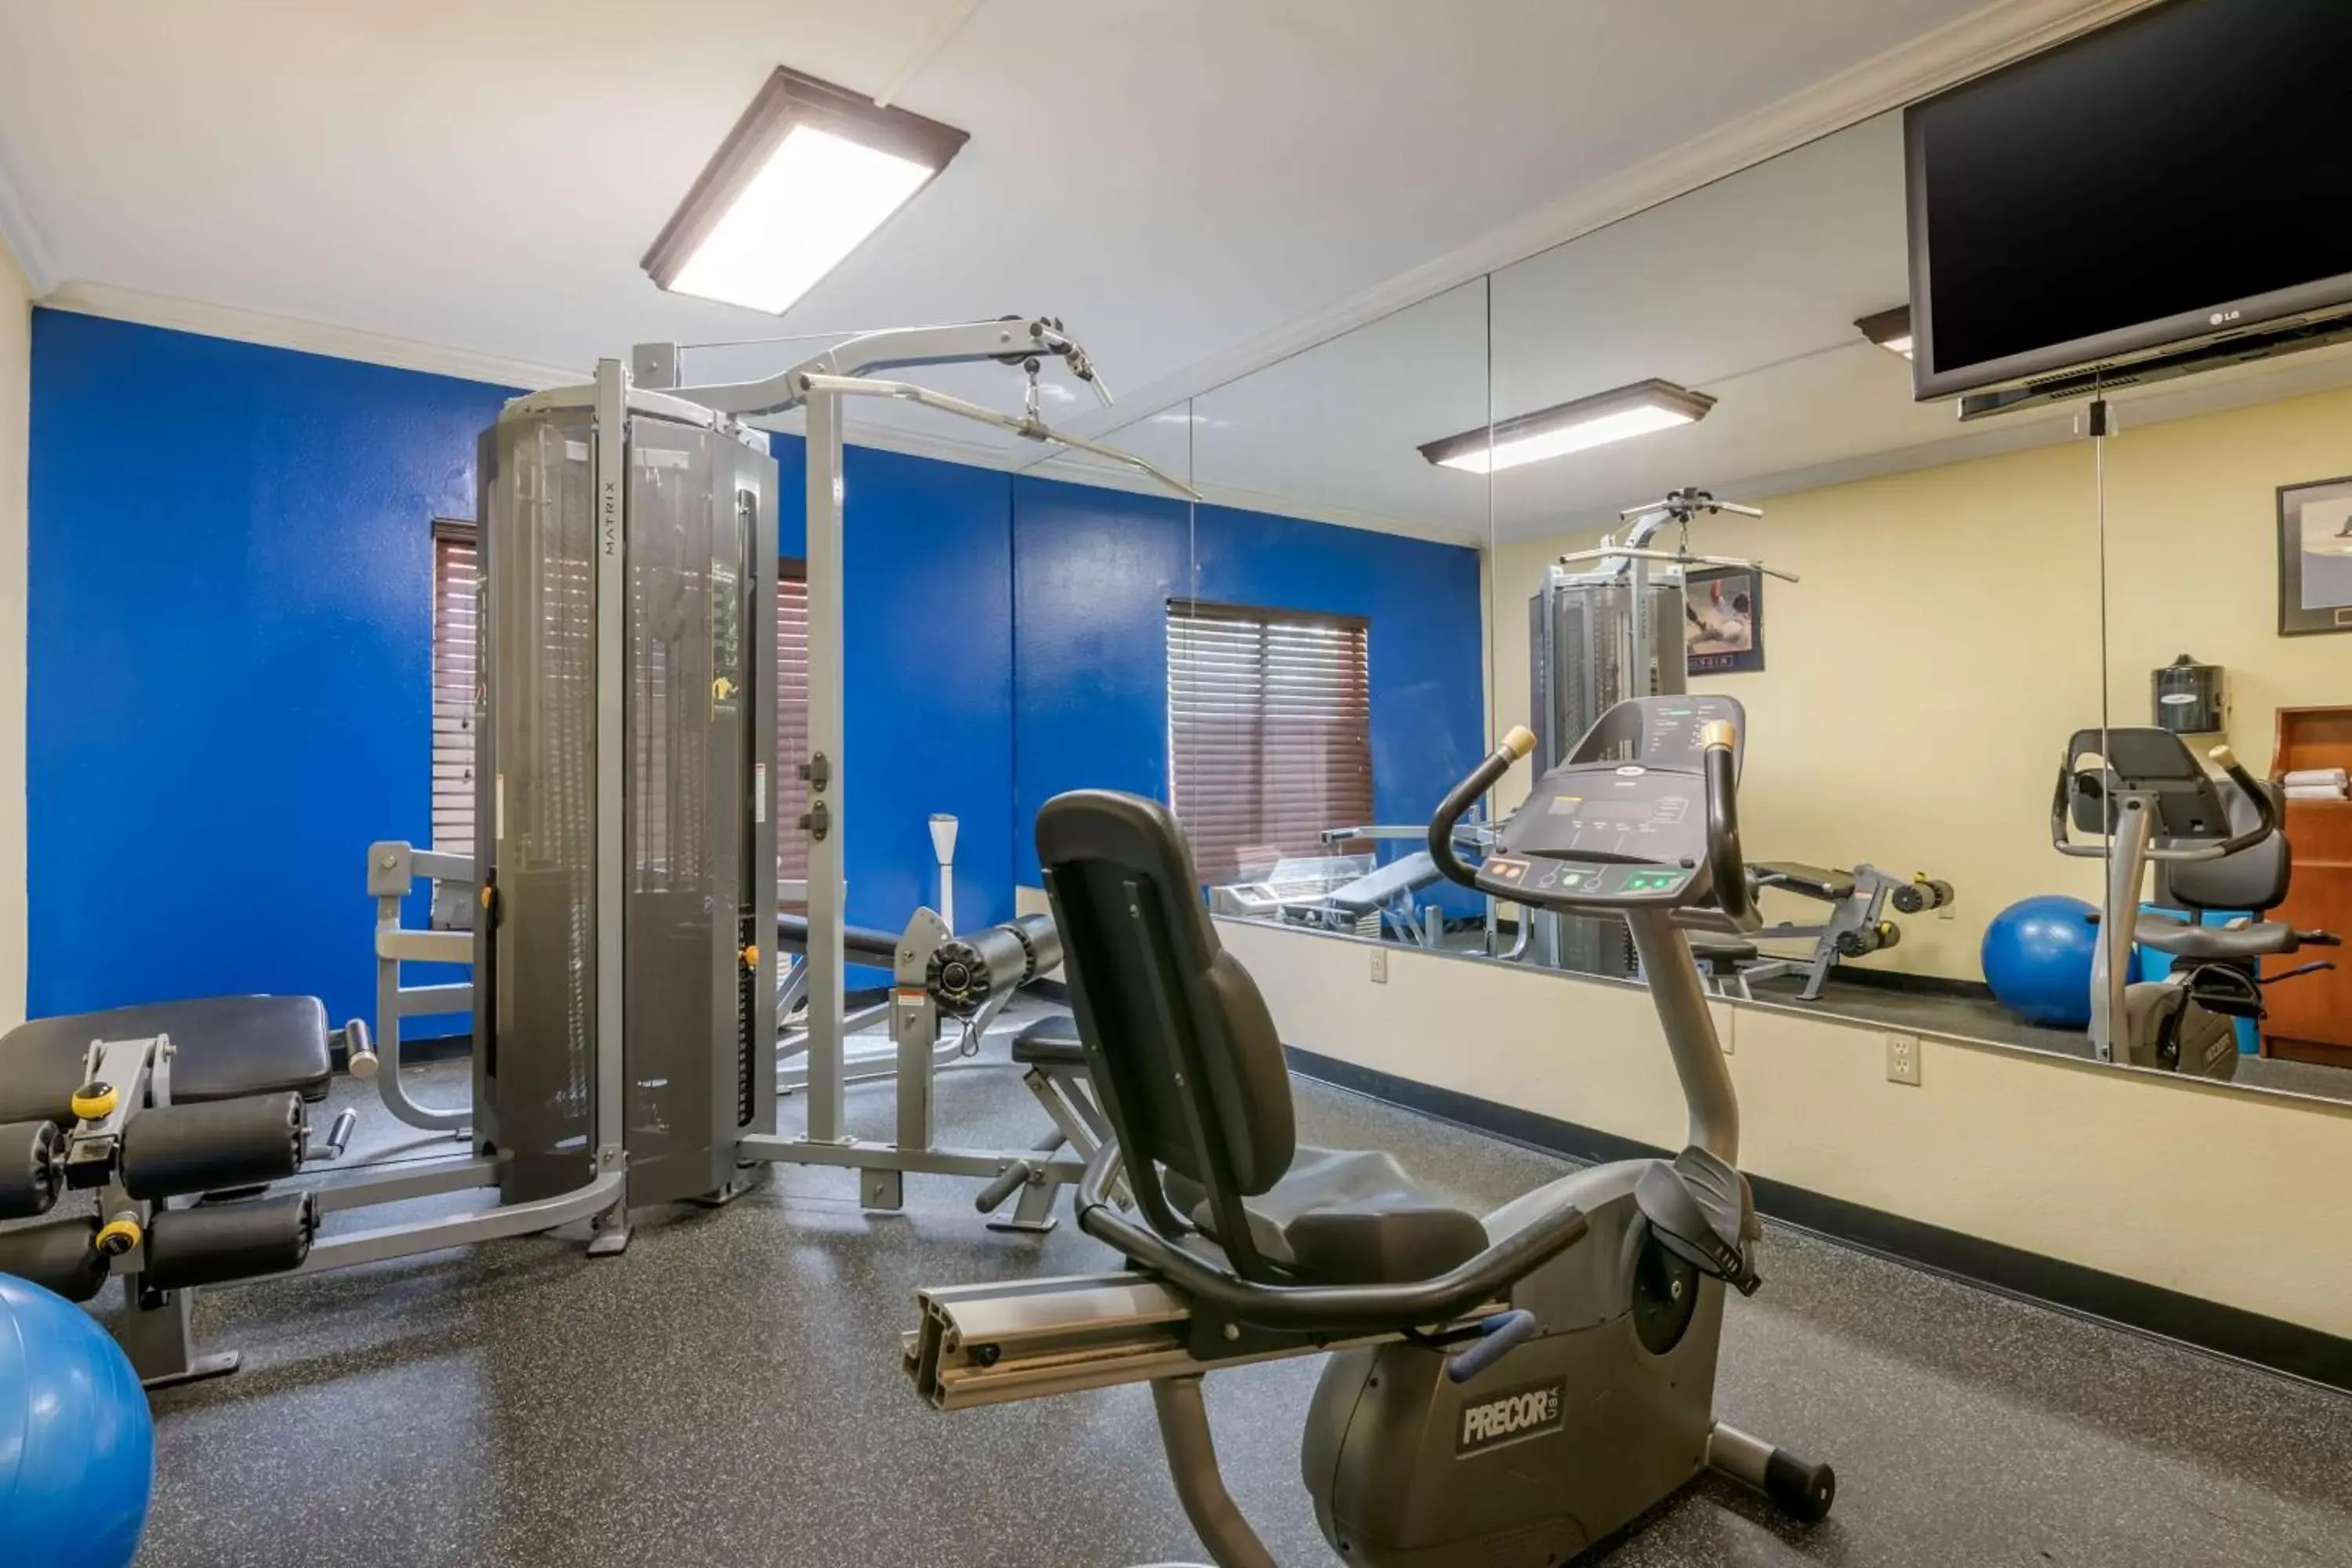 Fitness centre/facilities, Fitness Center/Facilities in Best Western Plus Palm Beach Gardens Hotel & Suites and Conference Ct